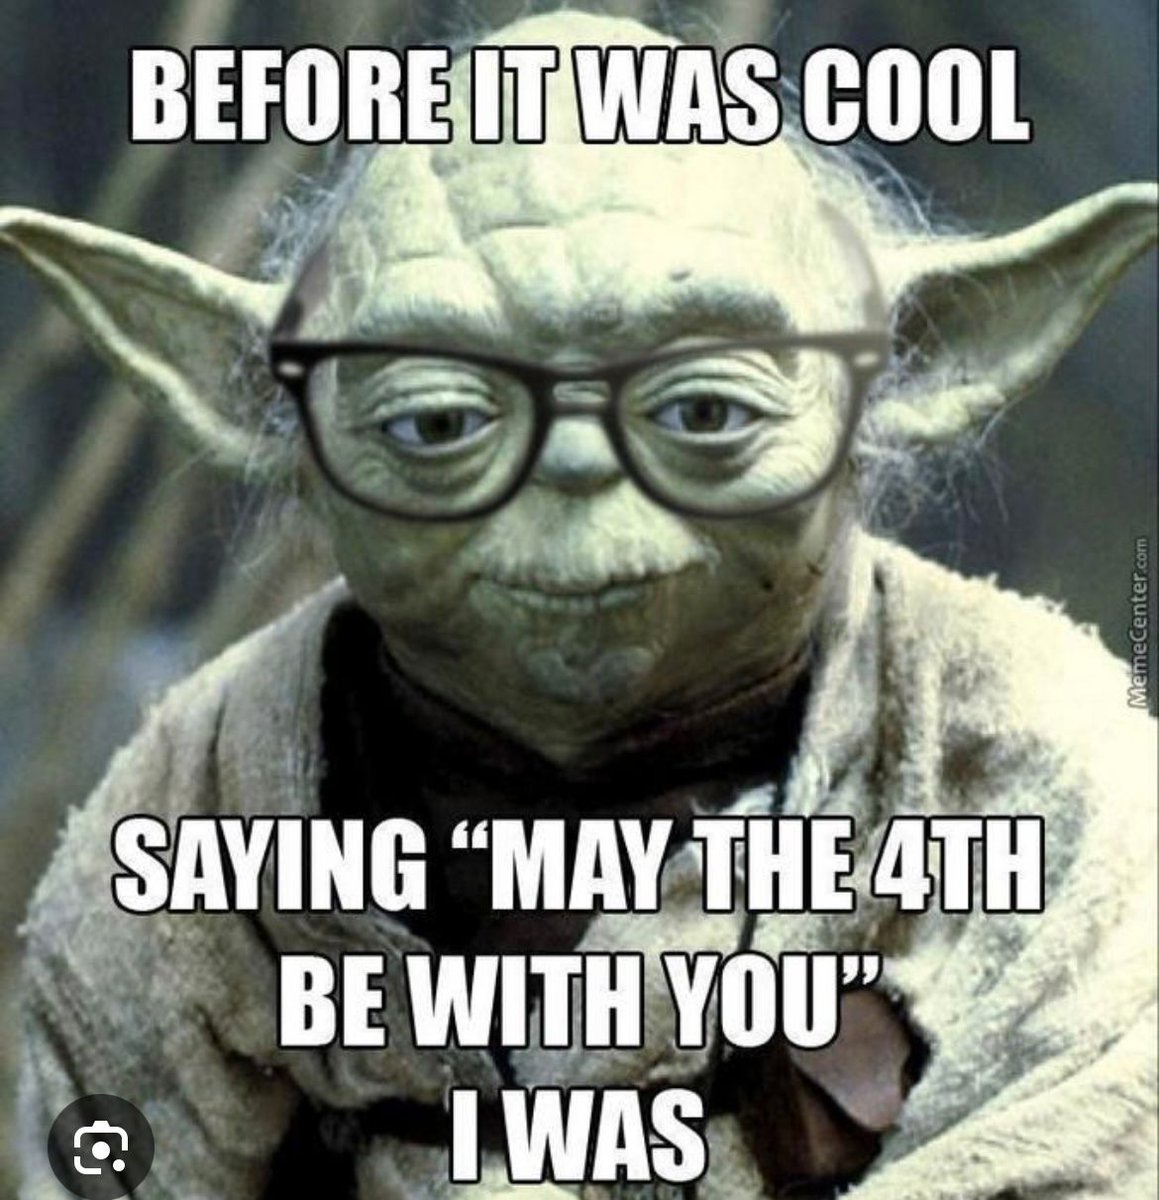 #HappySaturday! Sending best wishes to you all on this #MayThe4th, especially to the #StarWars and #sciencefiction communities. #MayThe4thBeWithYou! 
#TheOmniverse